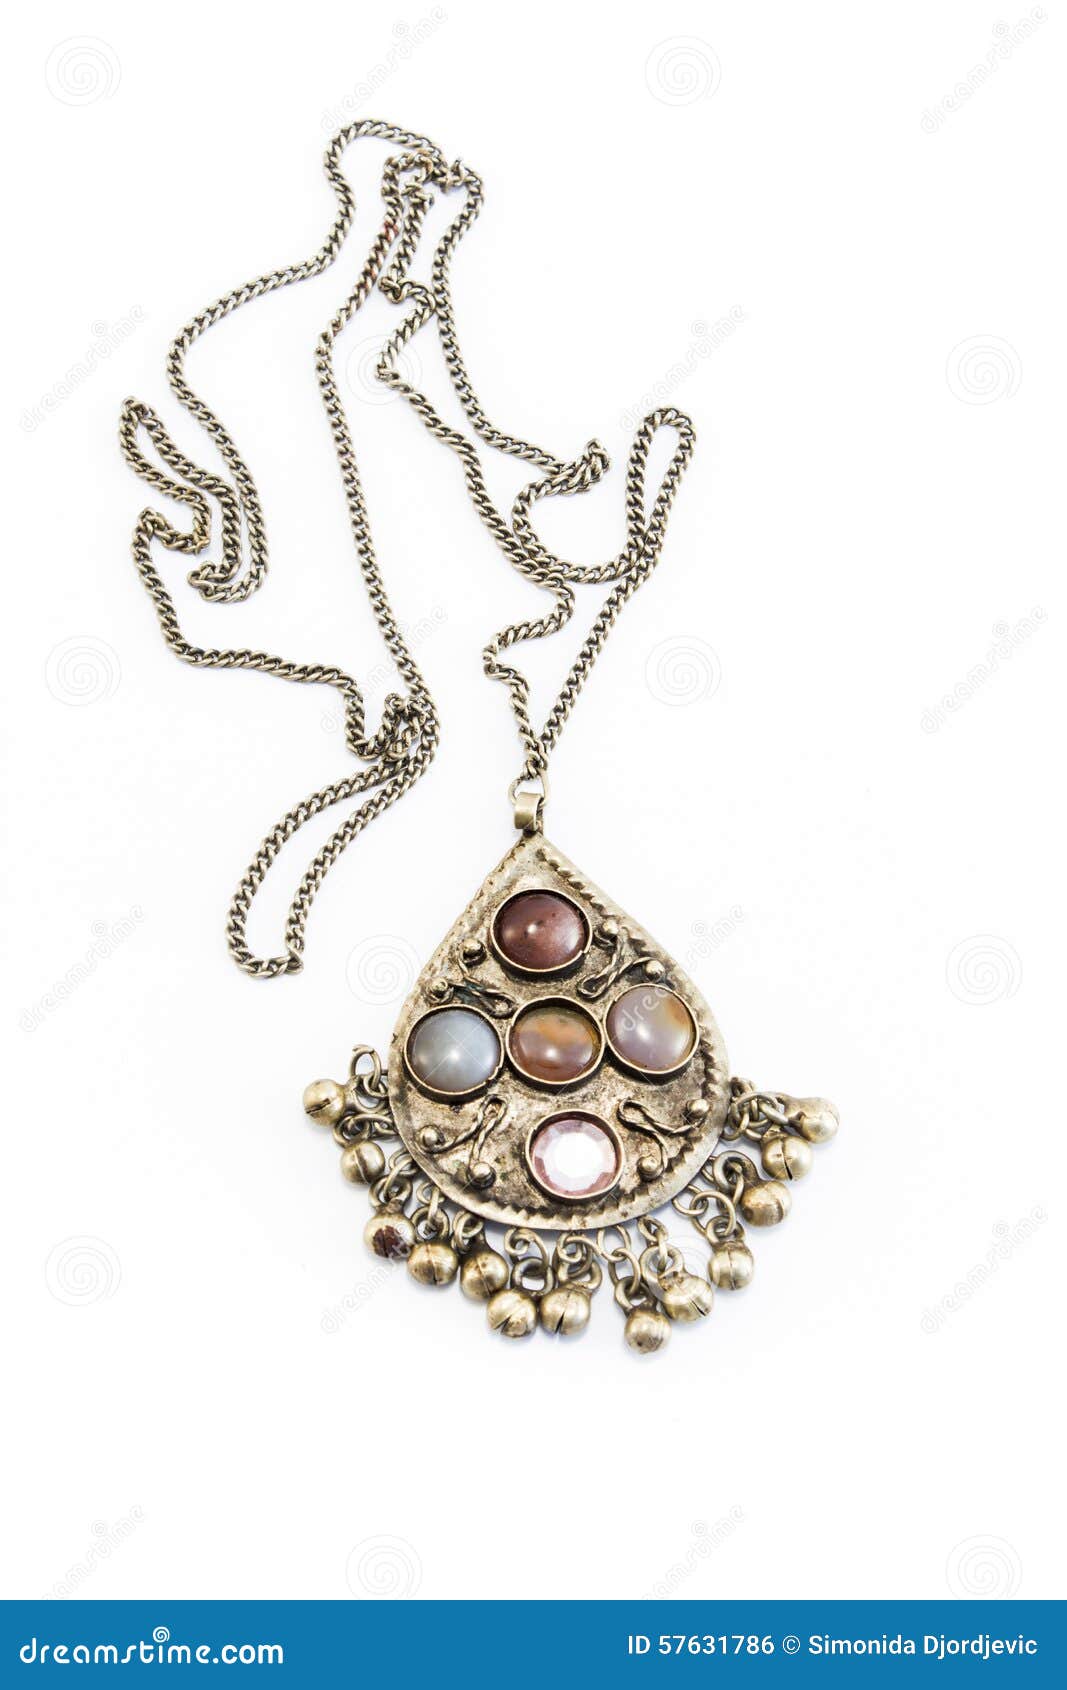 Metal Necklace with a Pendant Isolated on White Stock Photo - Image of ...